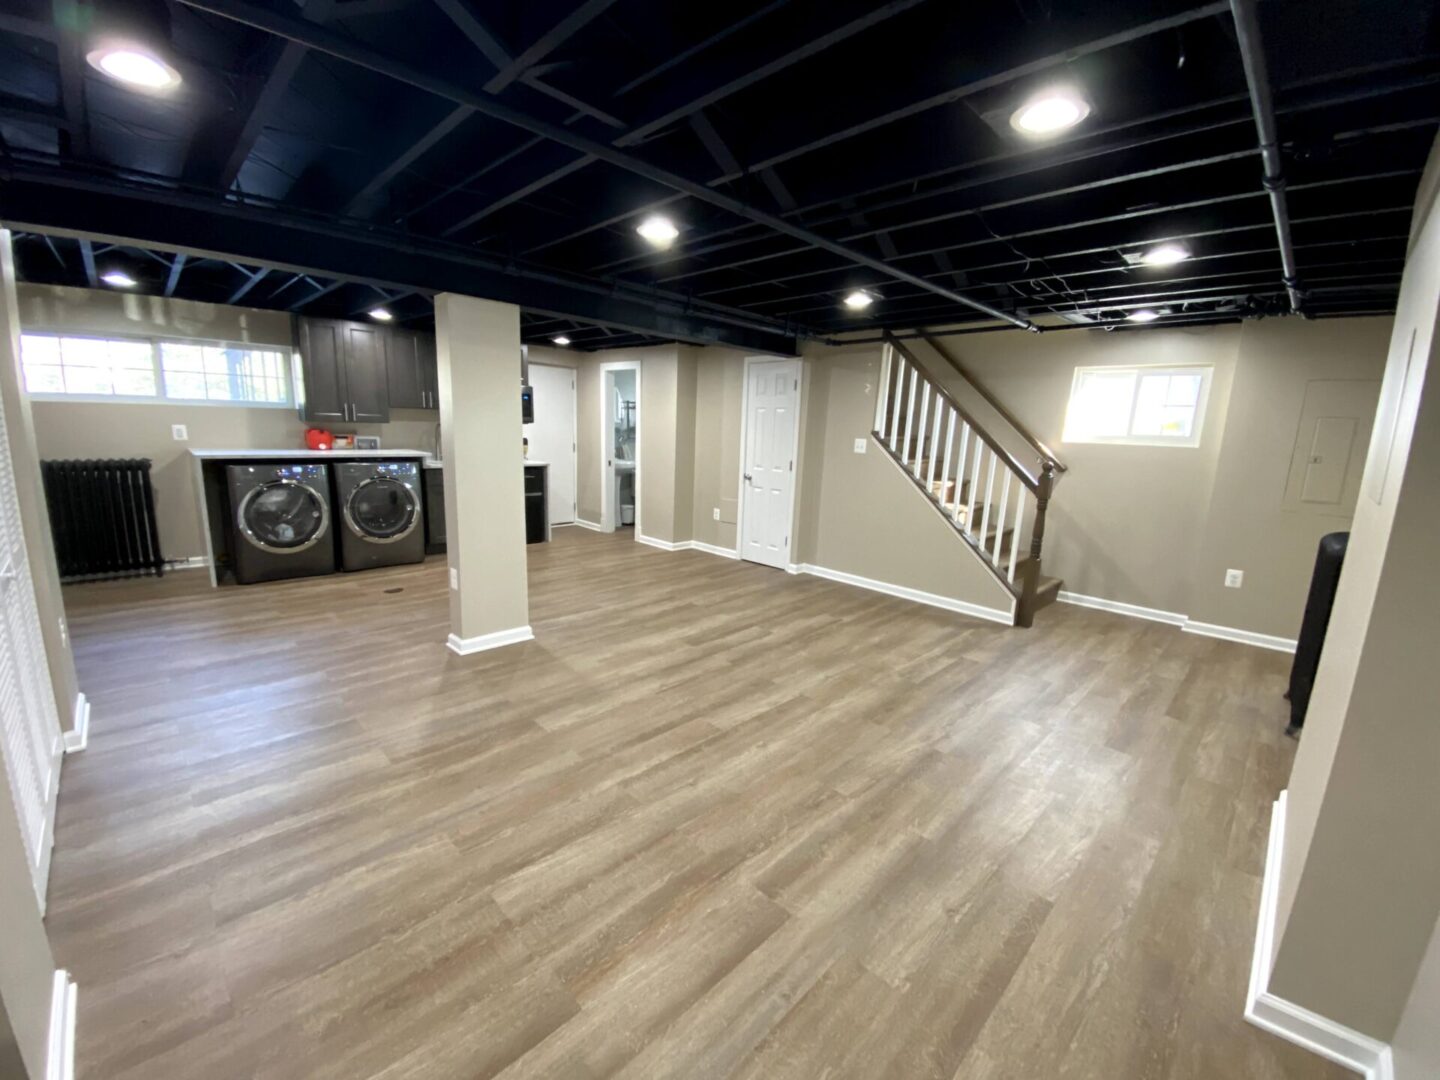 A room with black ceiling and wooden floors.